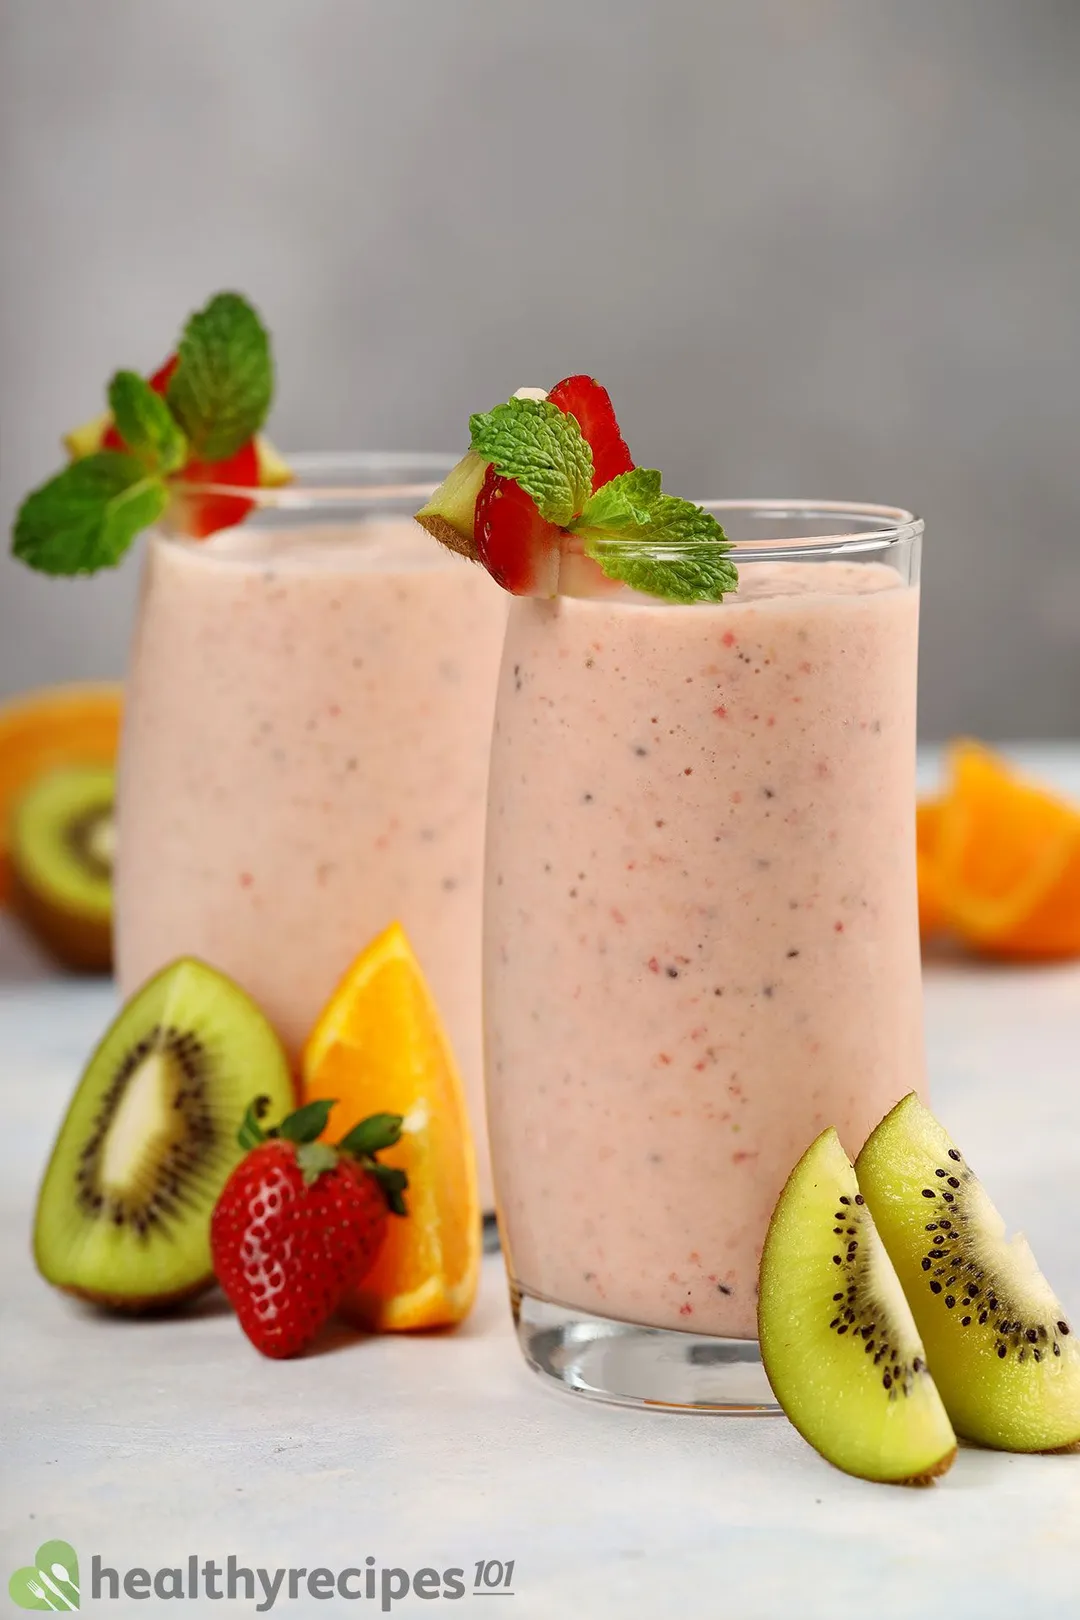 Two glasses of Kiwi Quencher Tropical Smoothie placed near slices of green kiwi, orange, and strawberry.